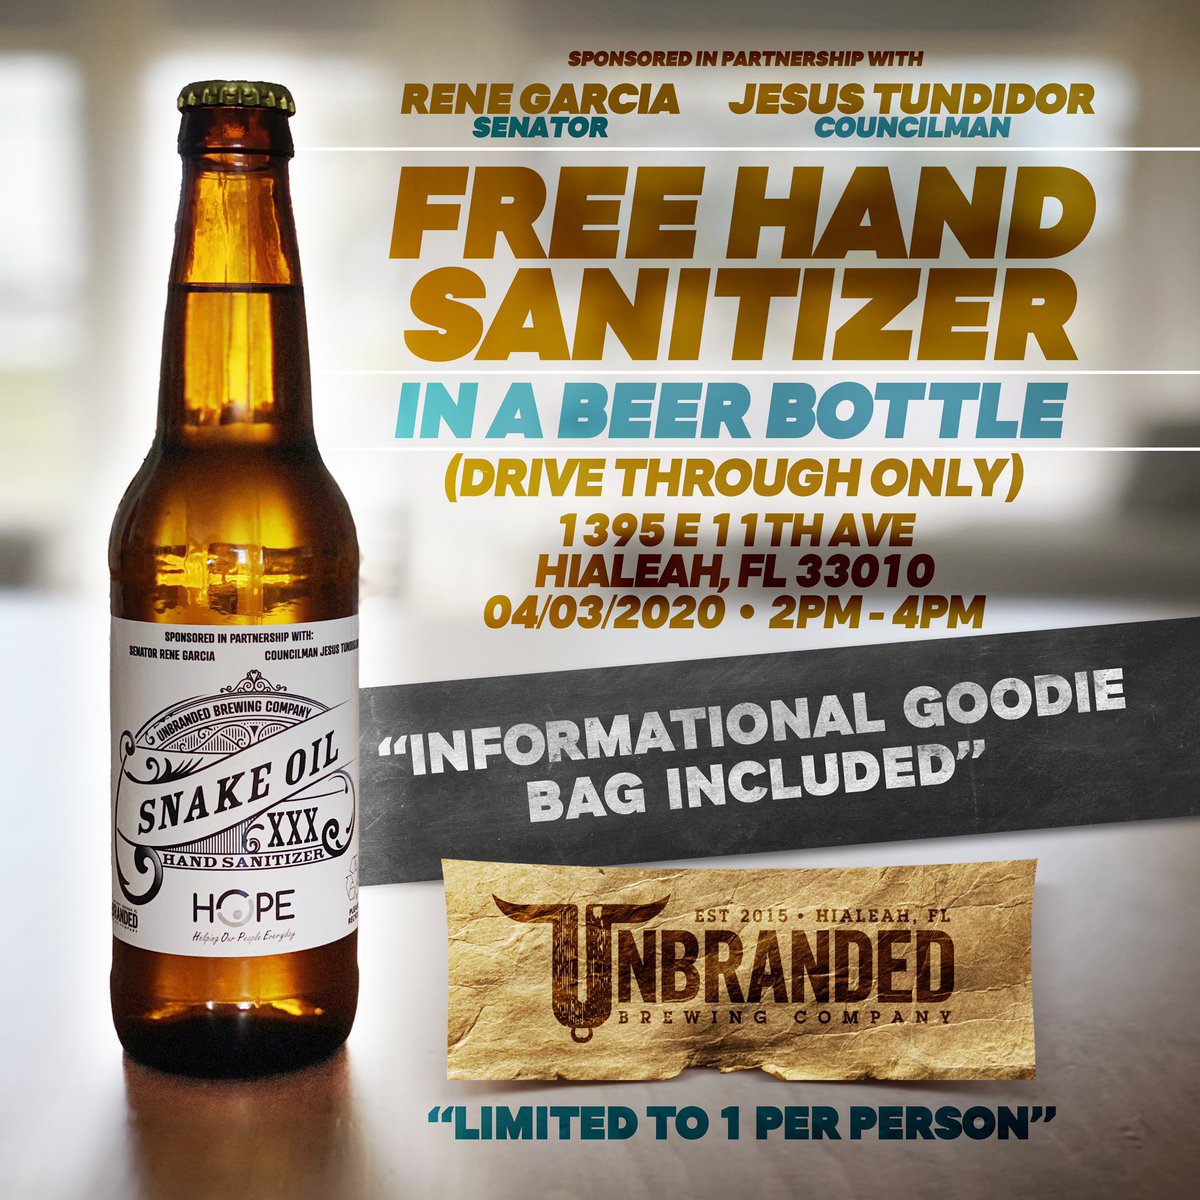 Tomorrow, between 2pm-4pm, Senator Garcia and I will be partnering with #Unbranded Brewing Company to distribute #free bottles of hand sanitizers made by your local Hialeah Brewery! This is DRIVE THROUGH ONLY! No beer! #hialeah #supportlocal .